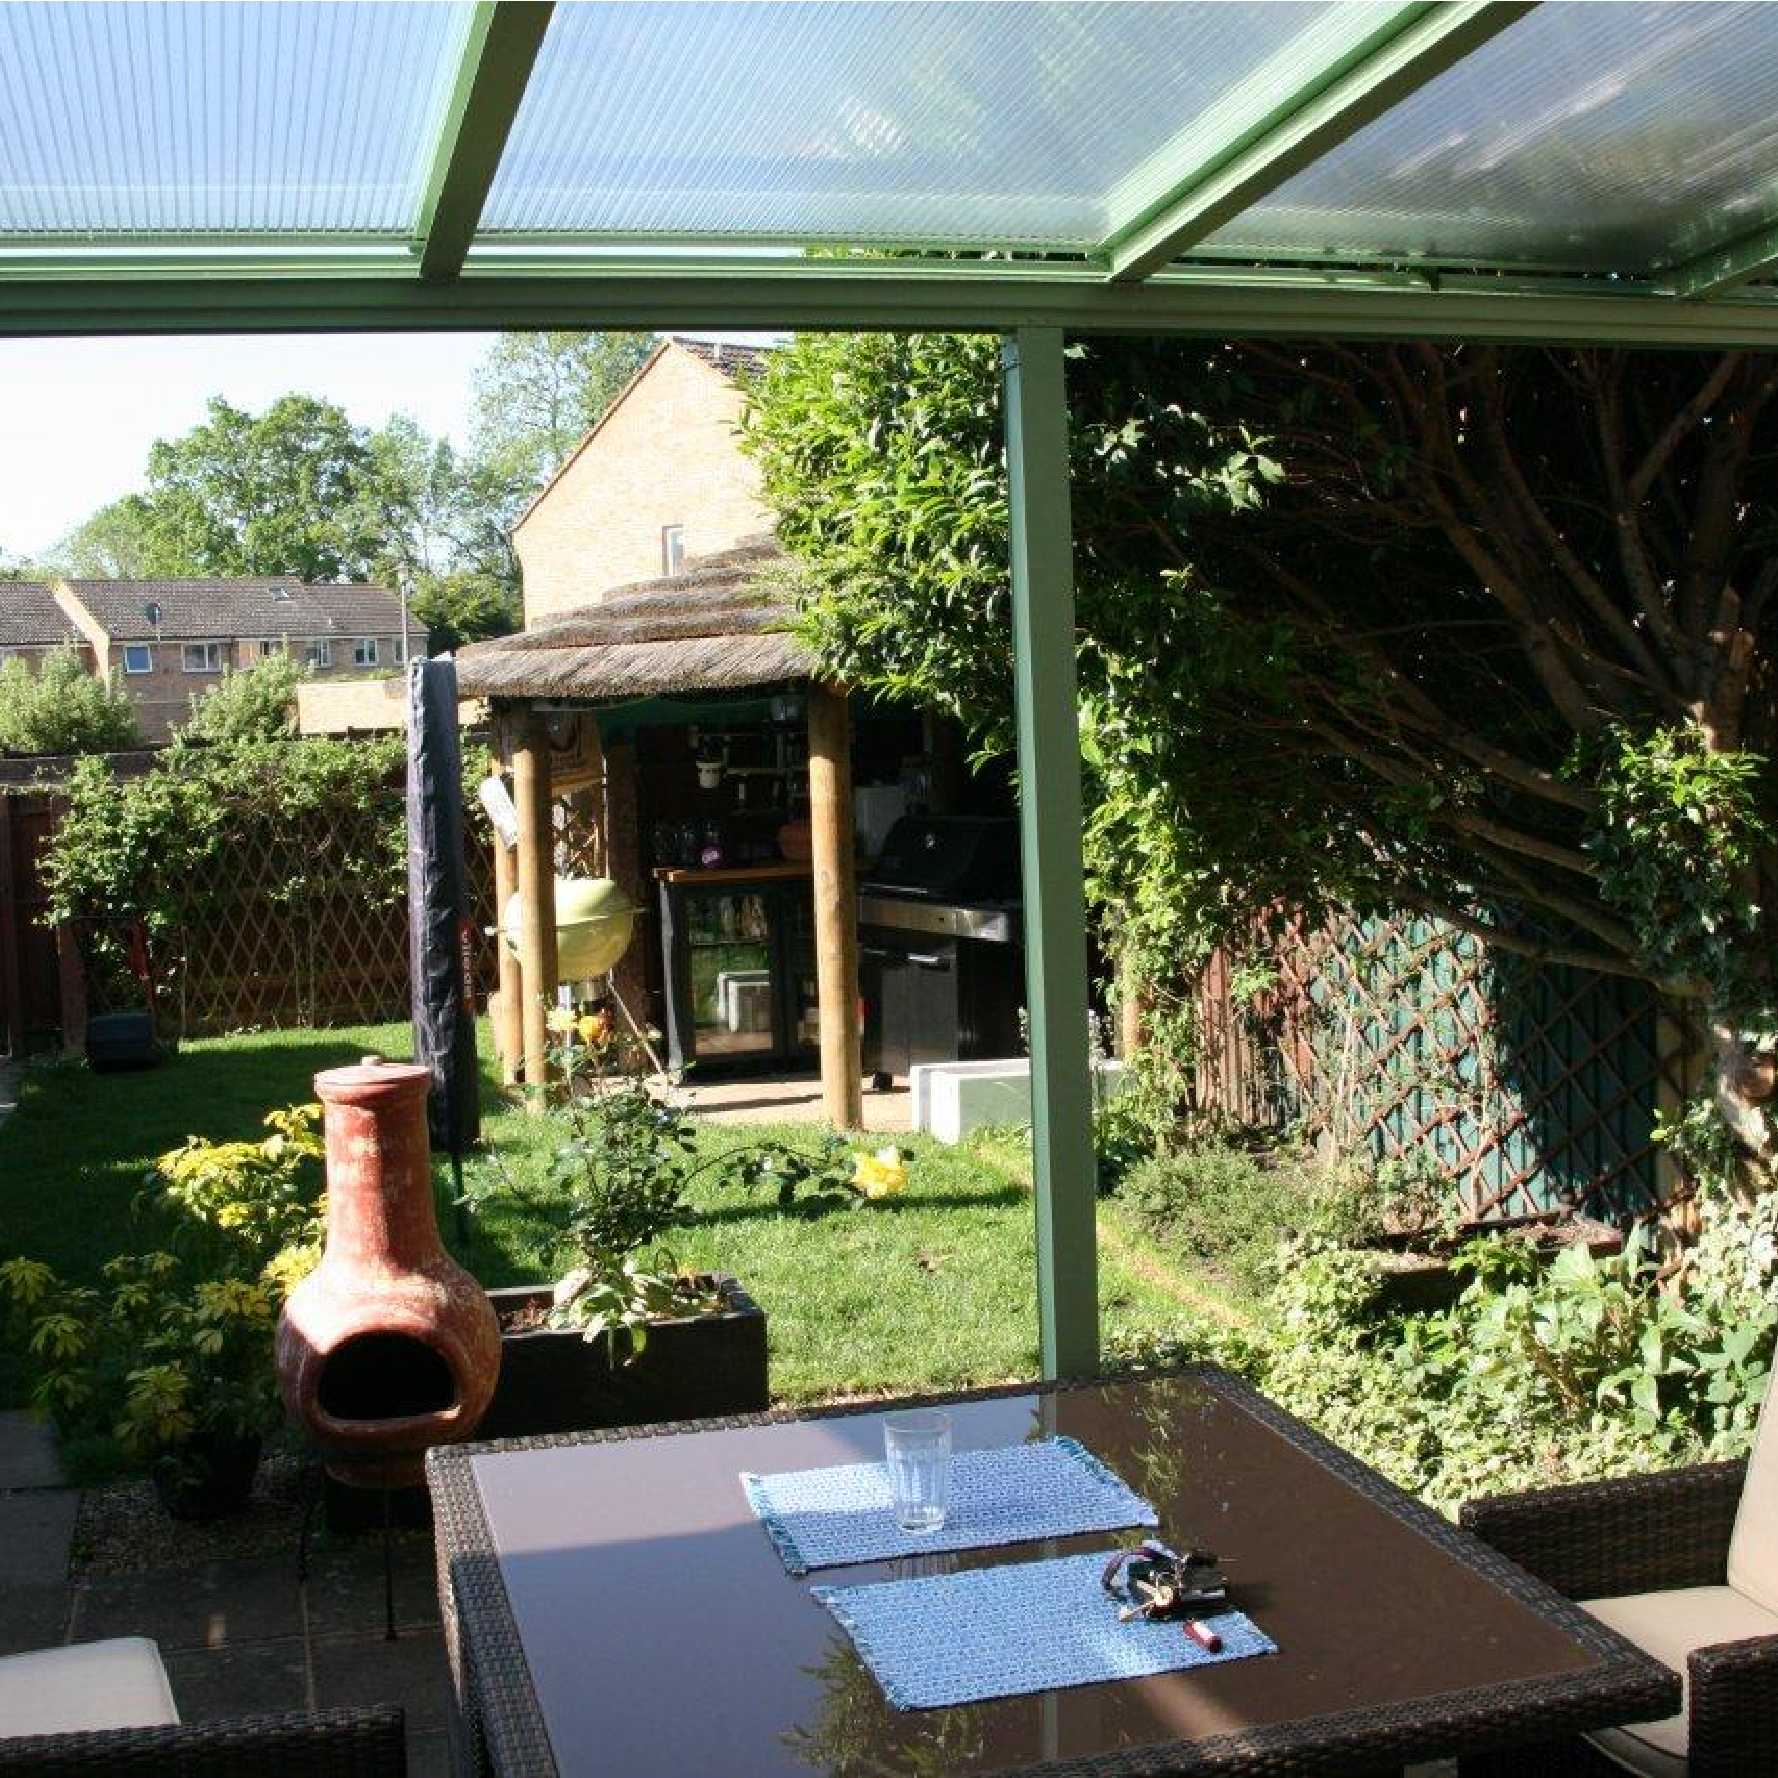 Affordable Omega Smart Lean-To Canopy, White with 16mm Polycarbonate Glazing - 5.2m (W) x 2.5m (P), (3) Supporting Posts